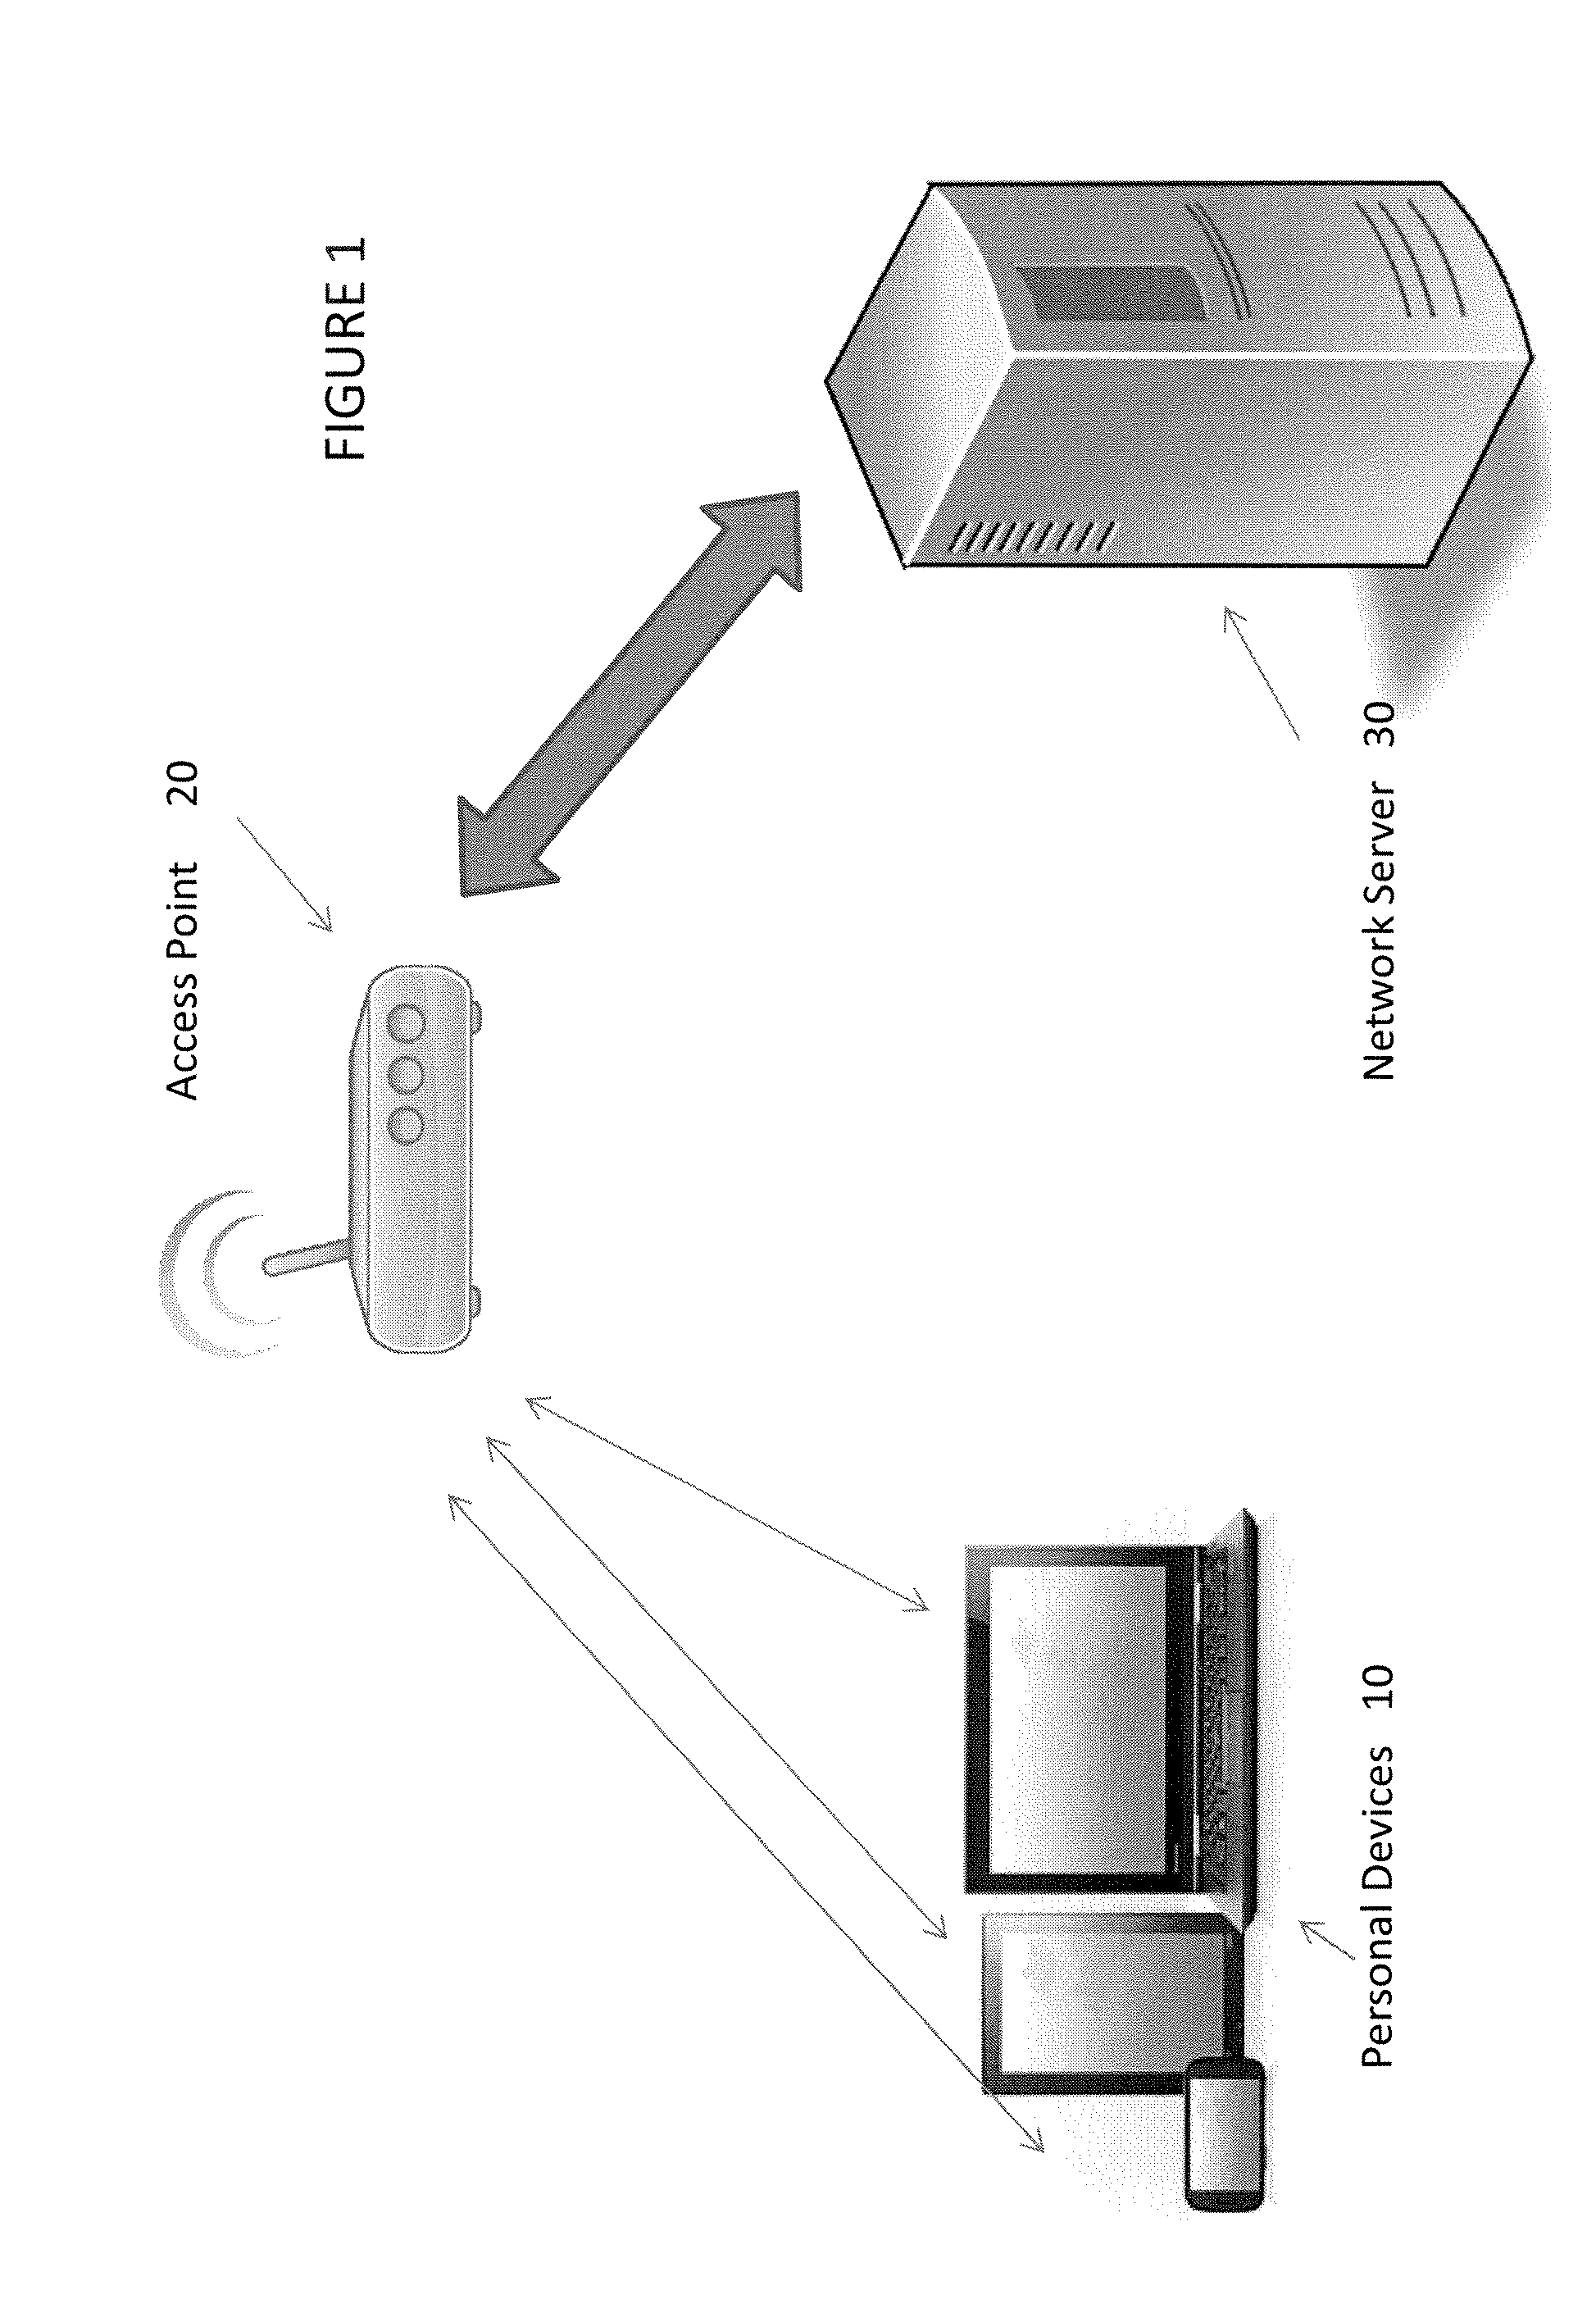 Method of accessing a network securely from a personal device, a personal device, a network server and an access point